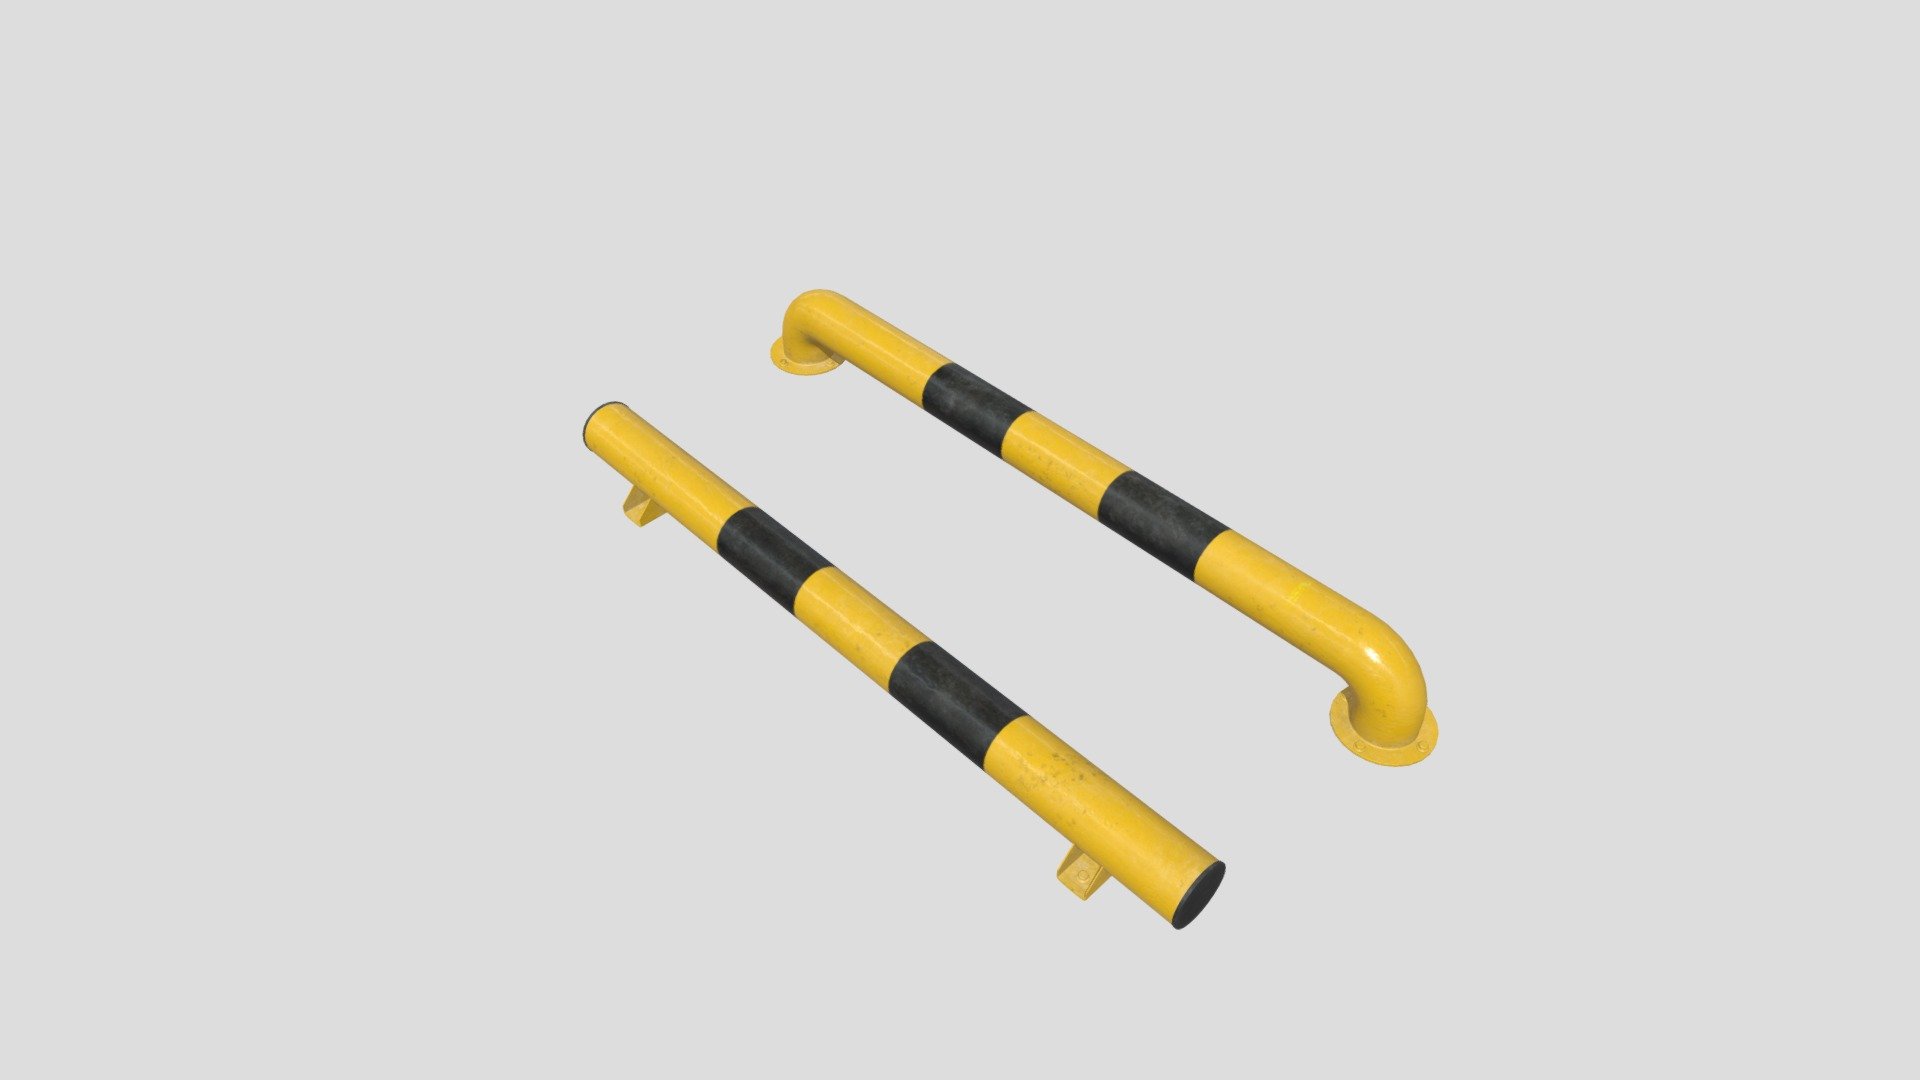 Highly detailed 3d model of pipes with all textures, shaders and materials. This 3d model is ready to use, just put it into your scene 3d model